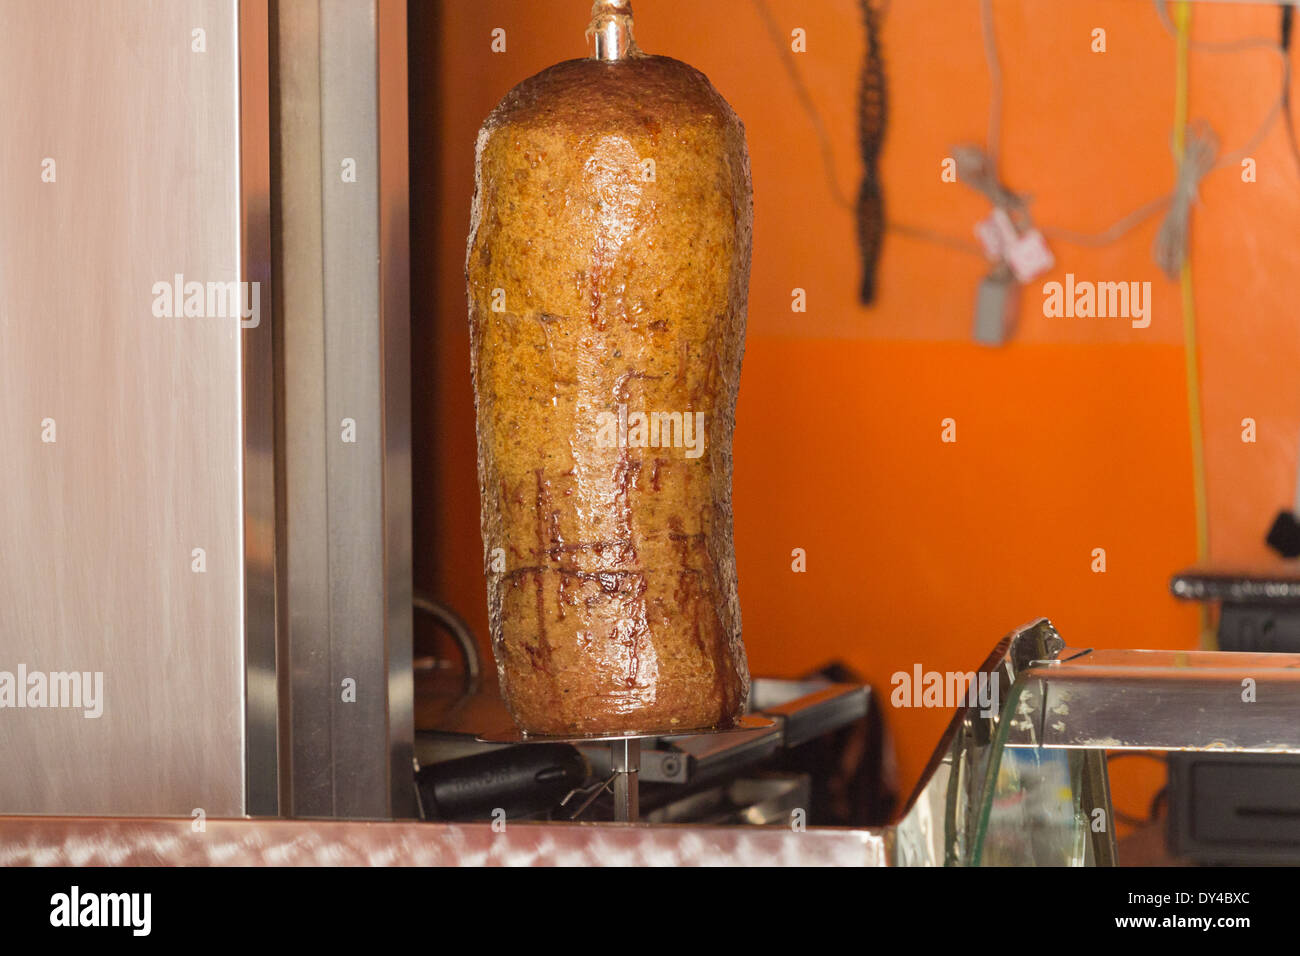 Doner kebap being grilled in a street shop Stock Photo